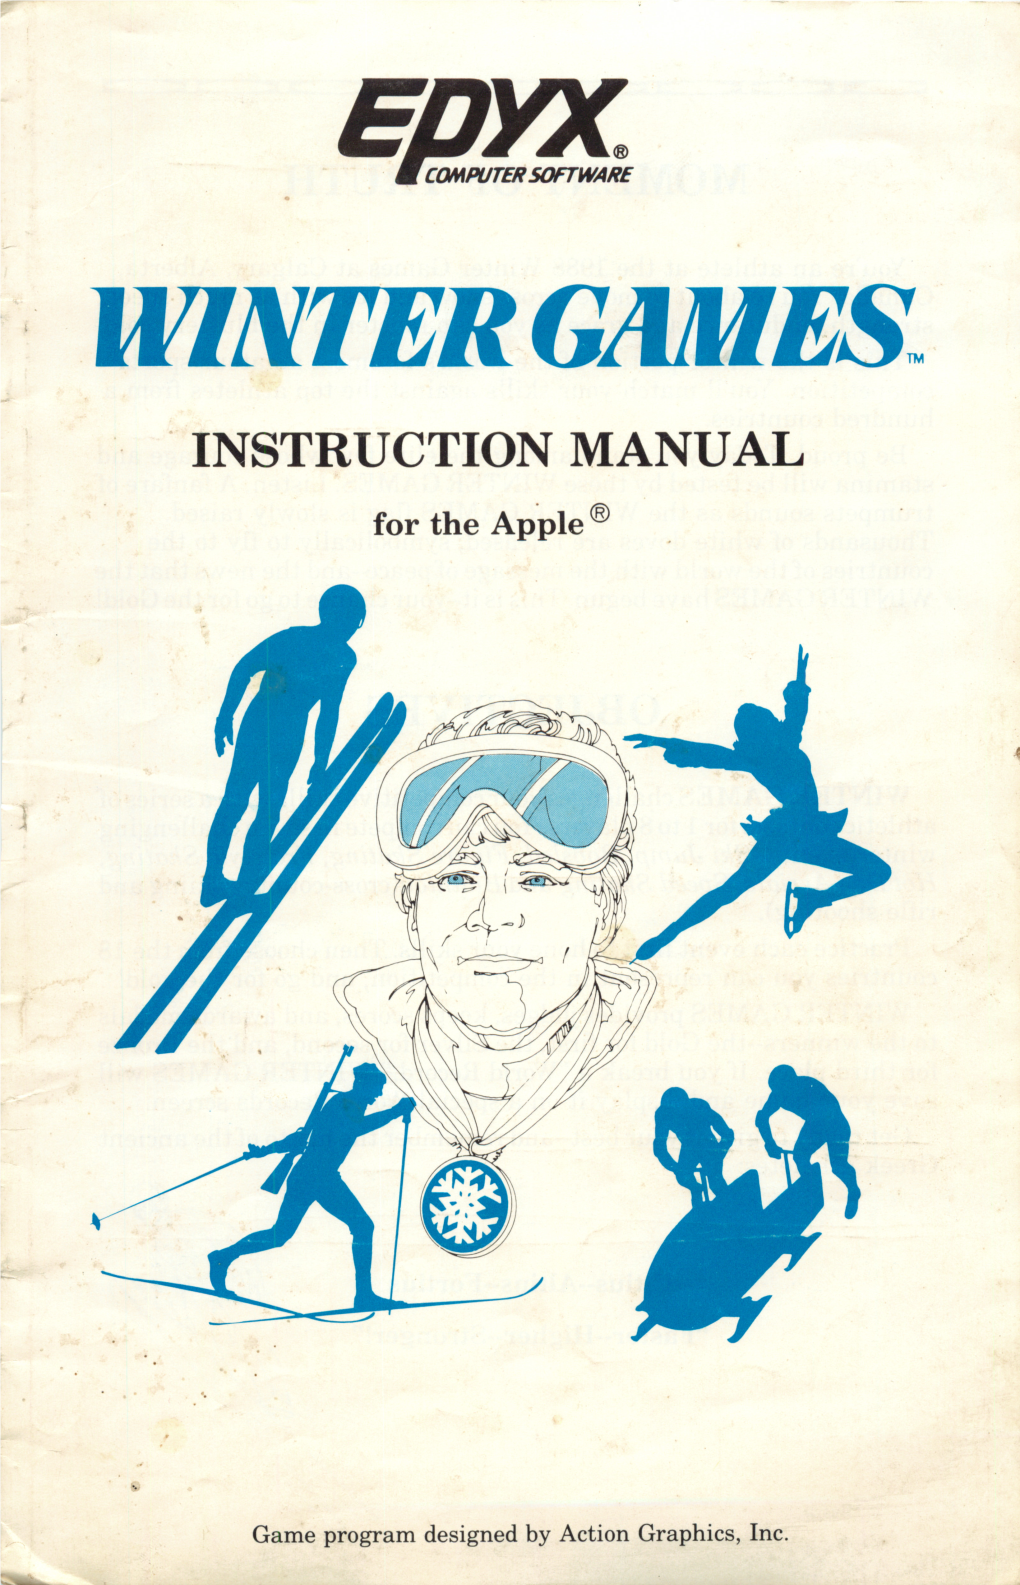 WINTER GAMES INSTRUCTION MANUAL for the Apple ®